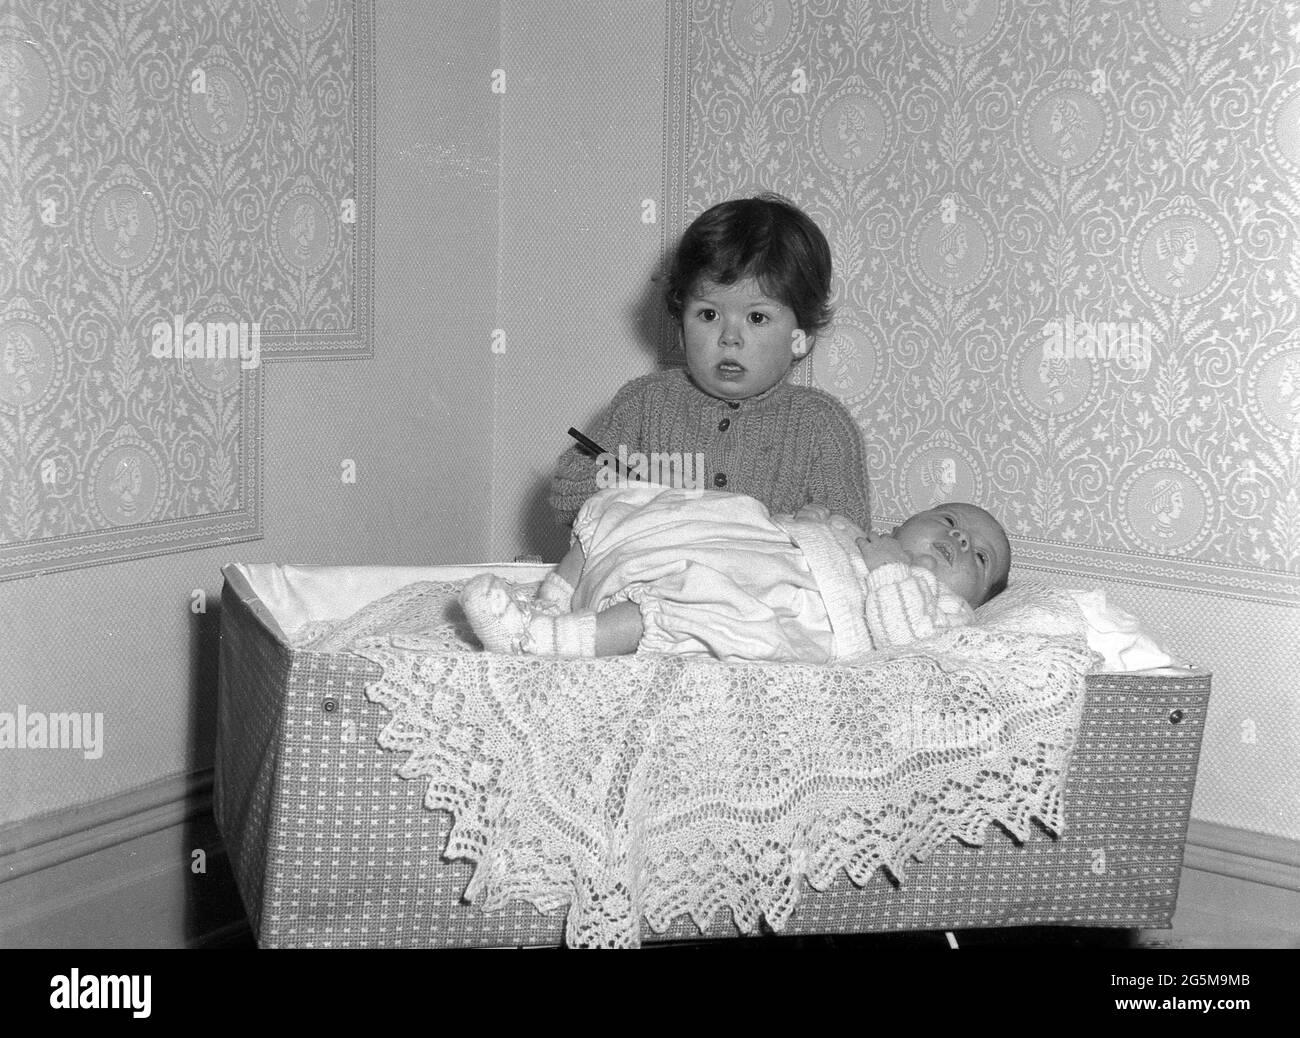 1960s, historical, in a corner of a room, a little girl standing beside a baby resting on a lace throw on top of a travel cot of the era, England, UK. Stock Photo